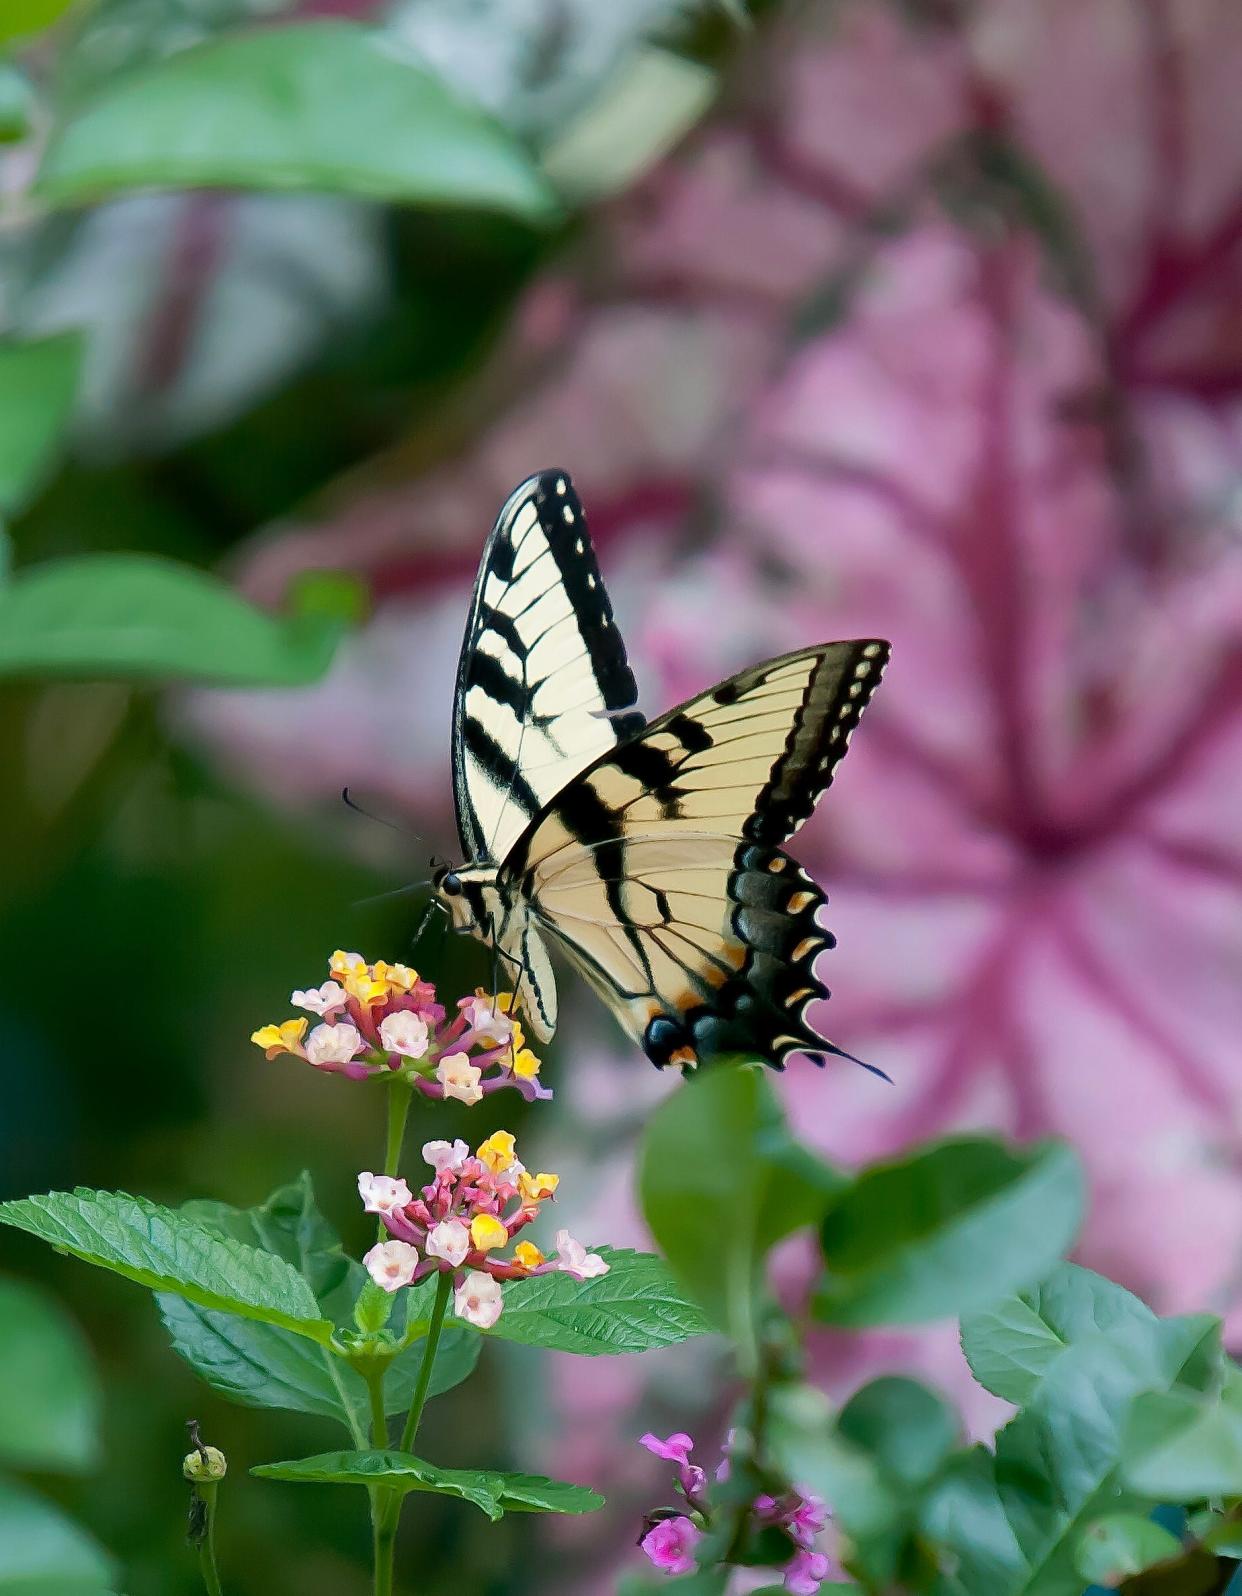 The Eastern Tiger Swallowtail is one of our largest butterflies and is the State Butterfly of Delaware, Virginia, North Carolina, South Carolina and Georgia.